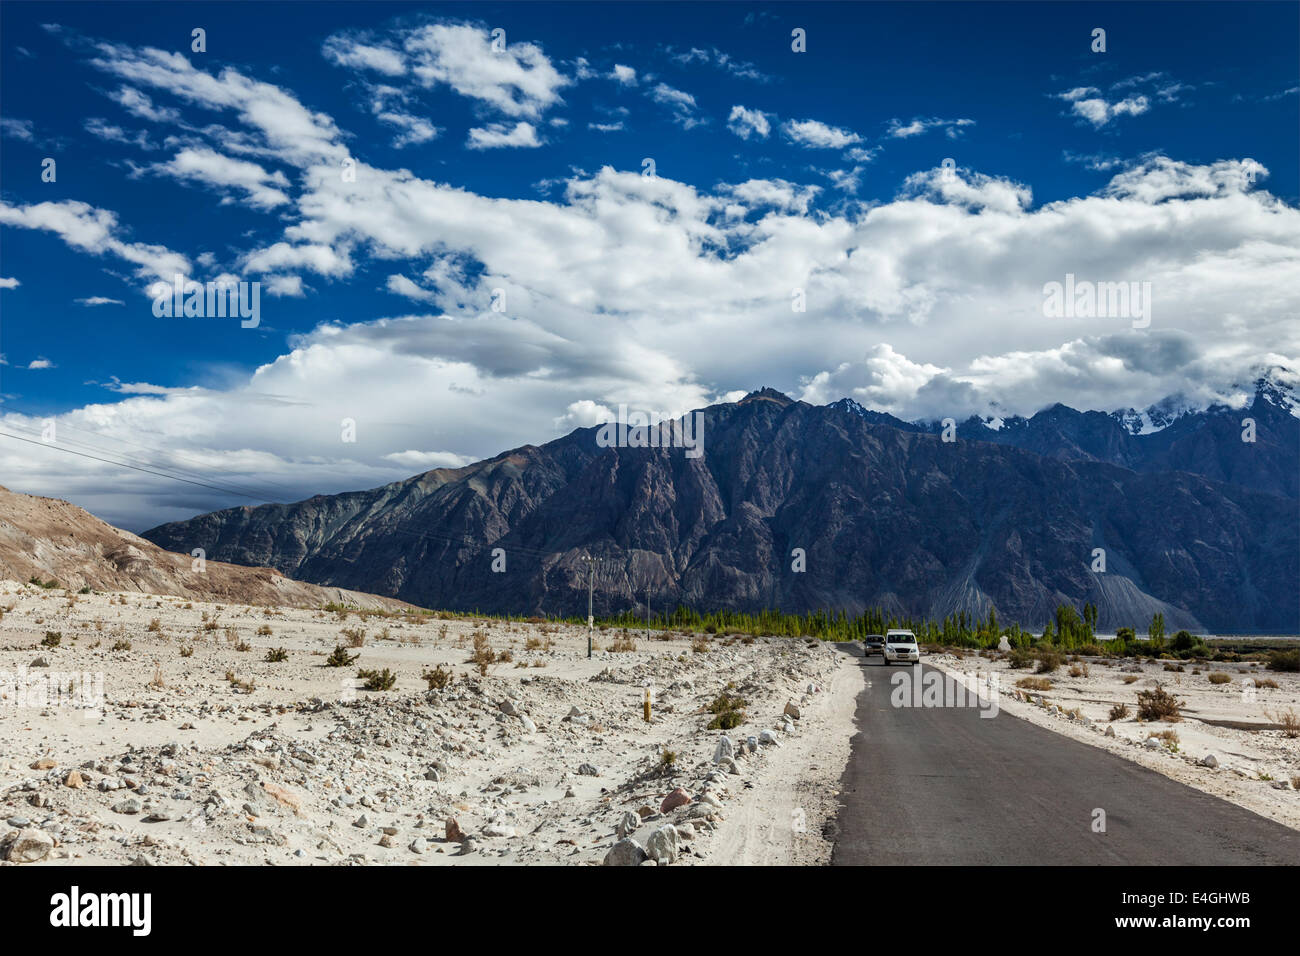 Asphalt road in Himalayas with cars. Nubra valley, Ladakh, India Stock Photo